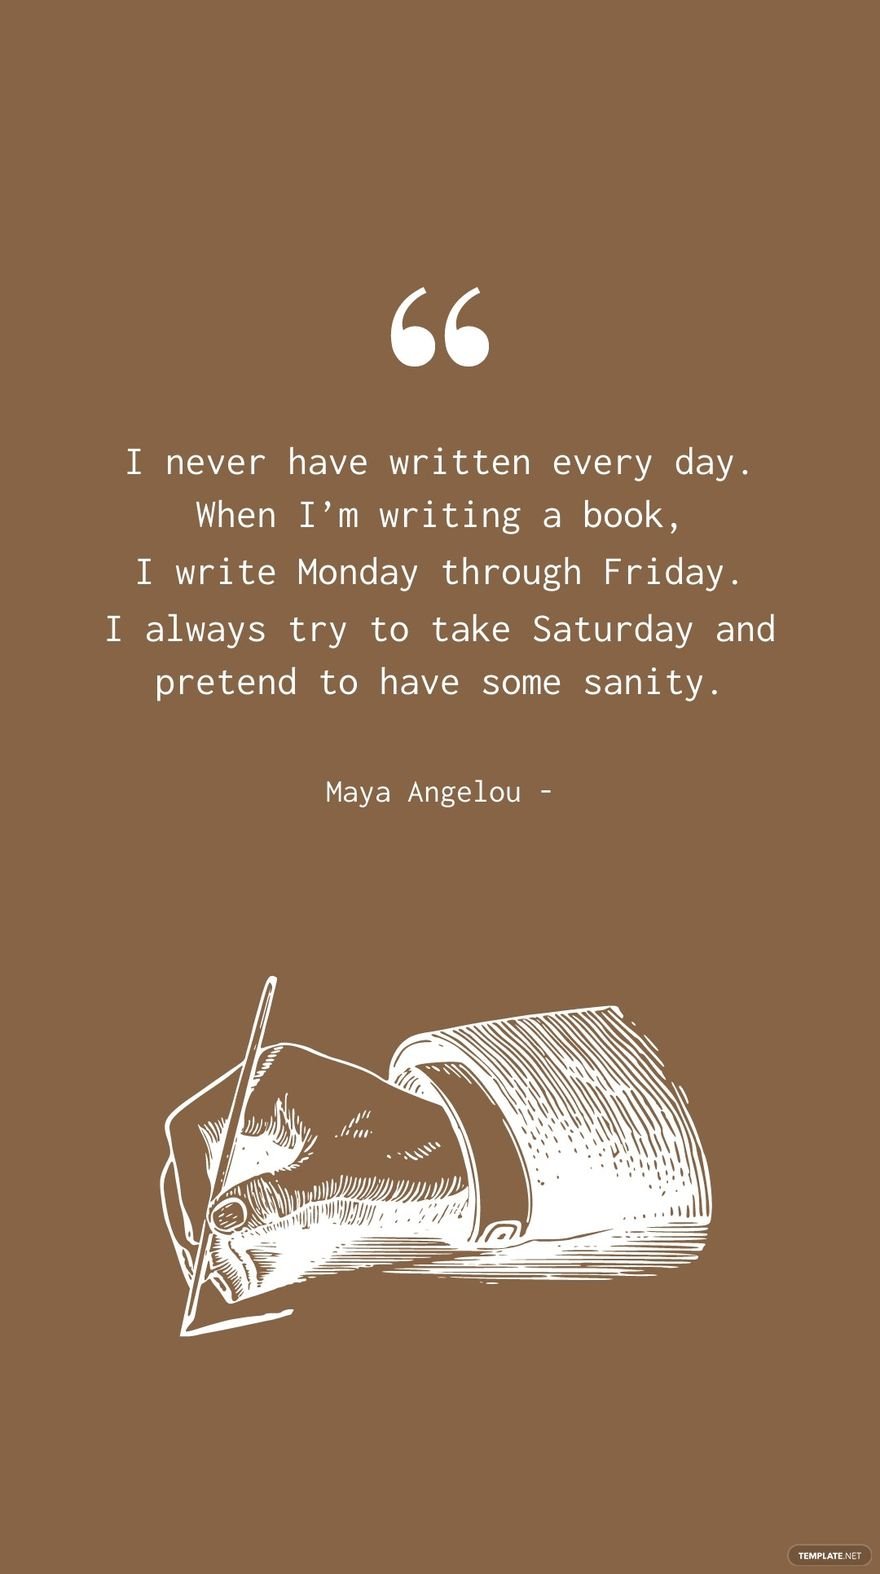 Maya Angelou - I never have written every day. When I’m writing a book, I write Monday through Friday. I always try to take Saturday and pretend to have some sanity.